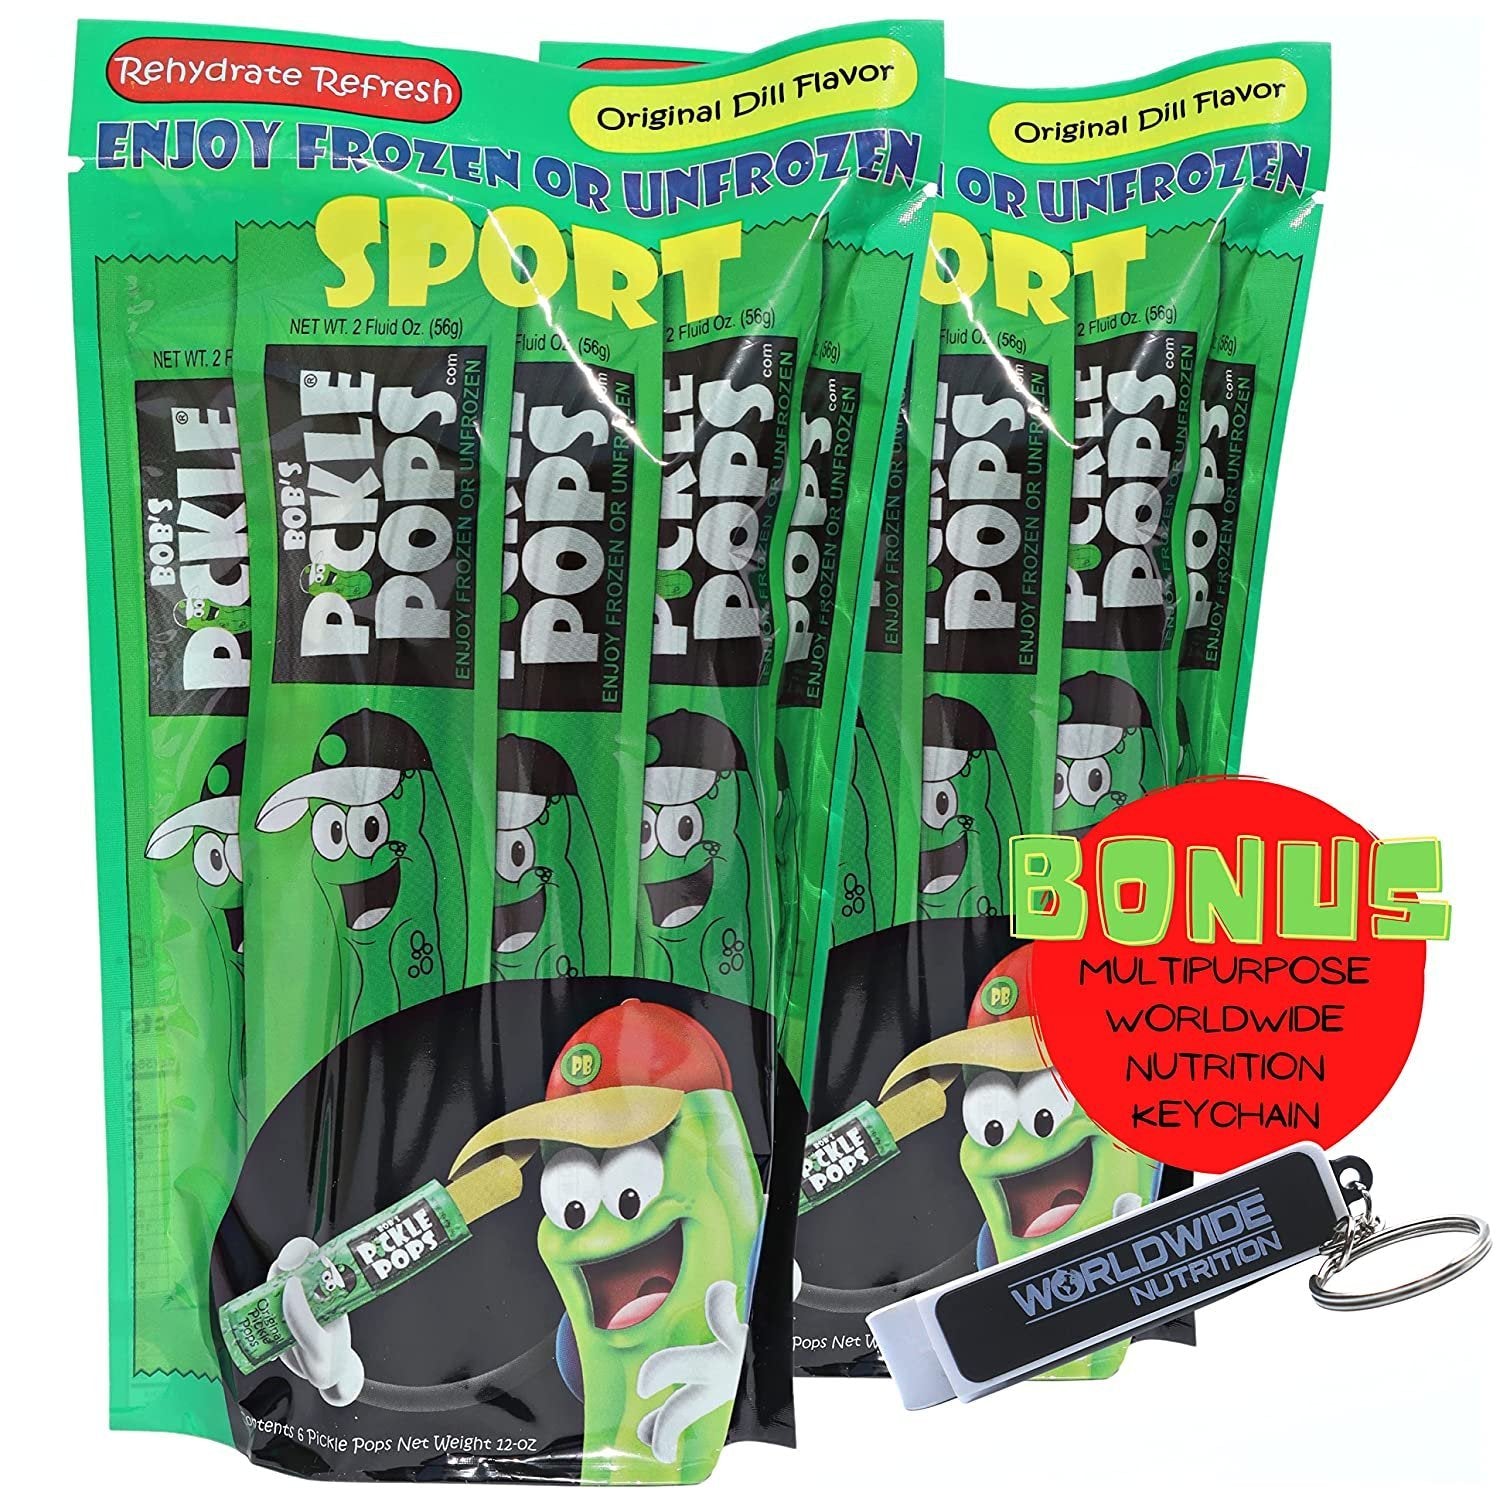 Bobs Pickle Pops Mucho Macho Original Dill - Electrolytes Freezer Pops Pre Workout Hydration - Athlete Recovery Pickle Juice for Leg Cramps with Multi Purpose Key Chain